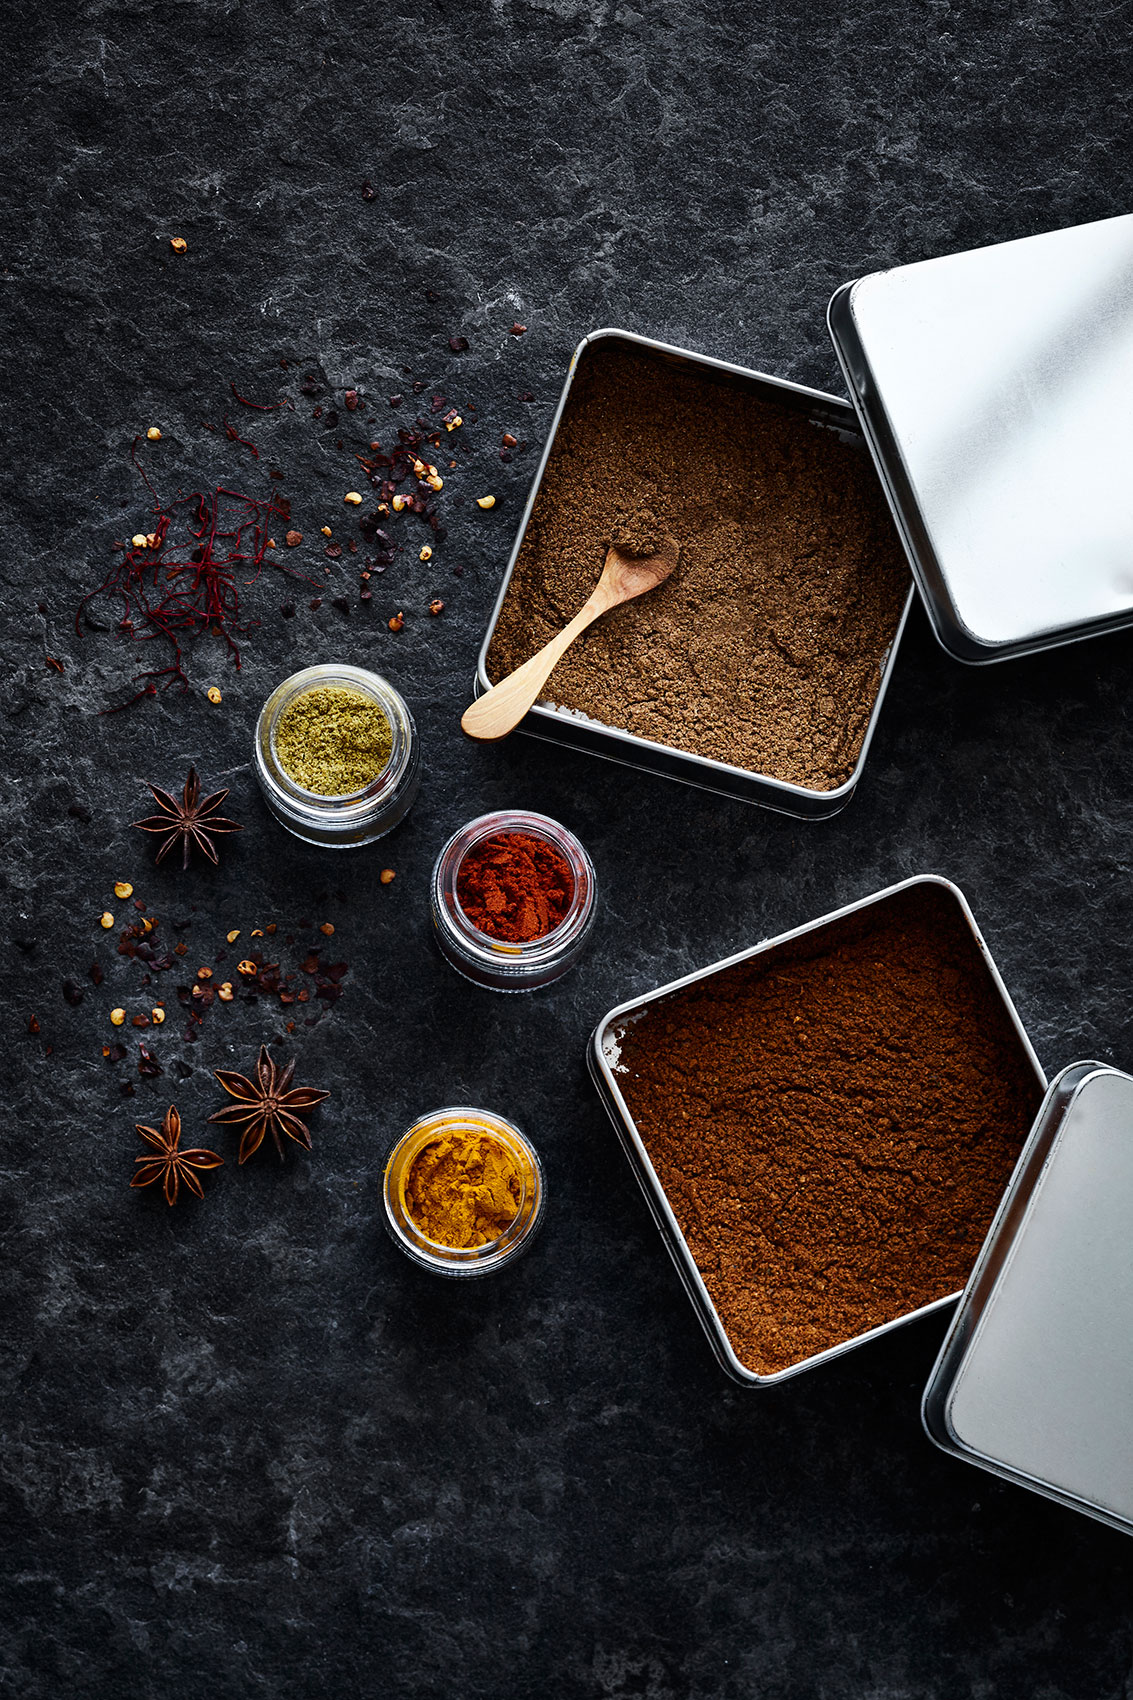 Spice Health Heroes • Colourful Powdered Spices in Square Tins • Cookbook & Editorial Food Photography